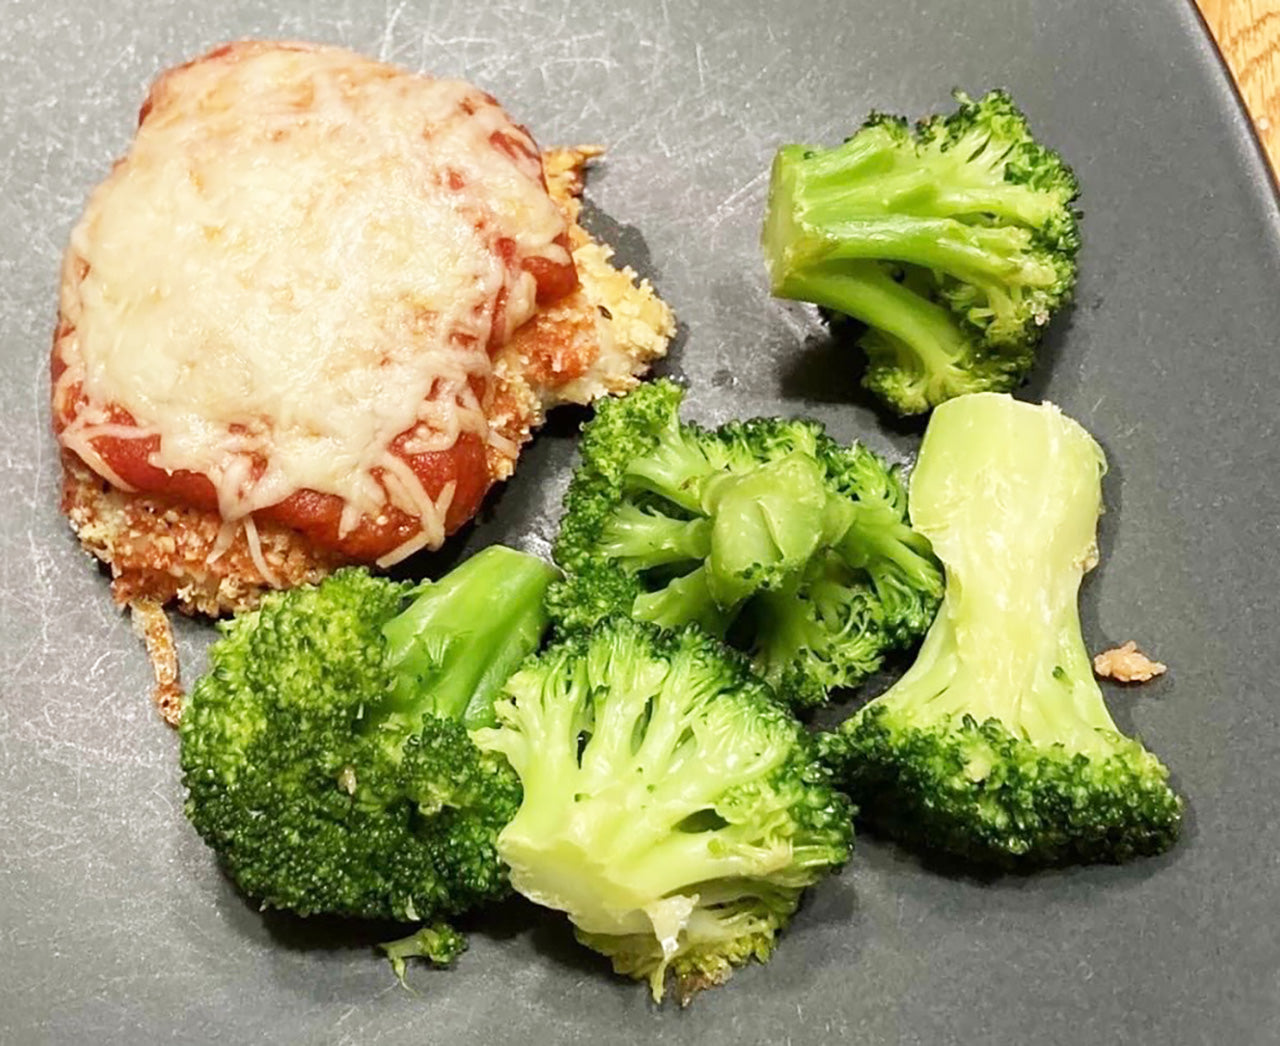 Oven Bake Chicken Parmesan with Roasted Broccoli